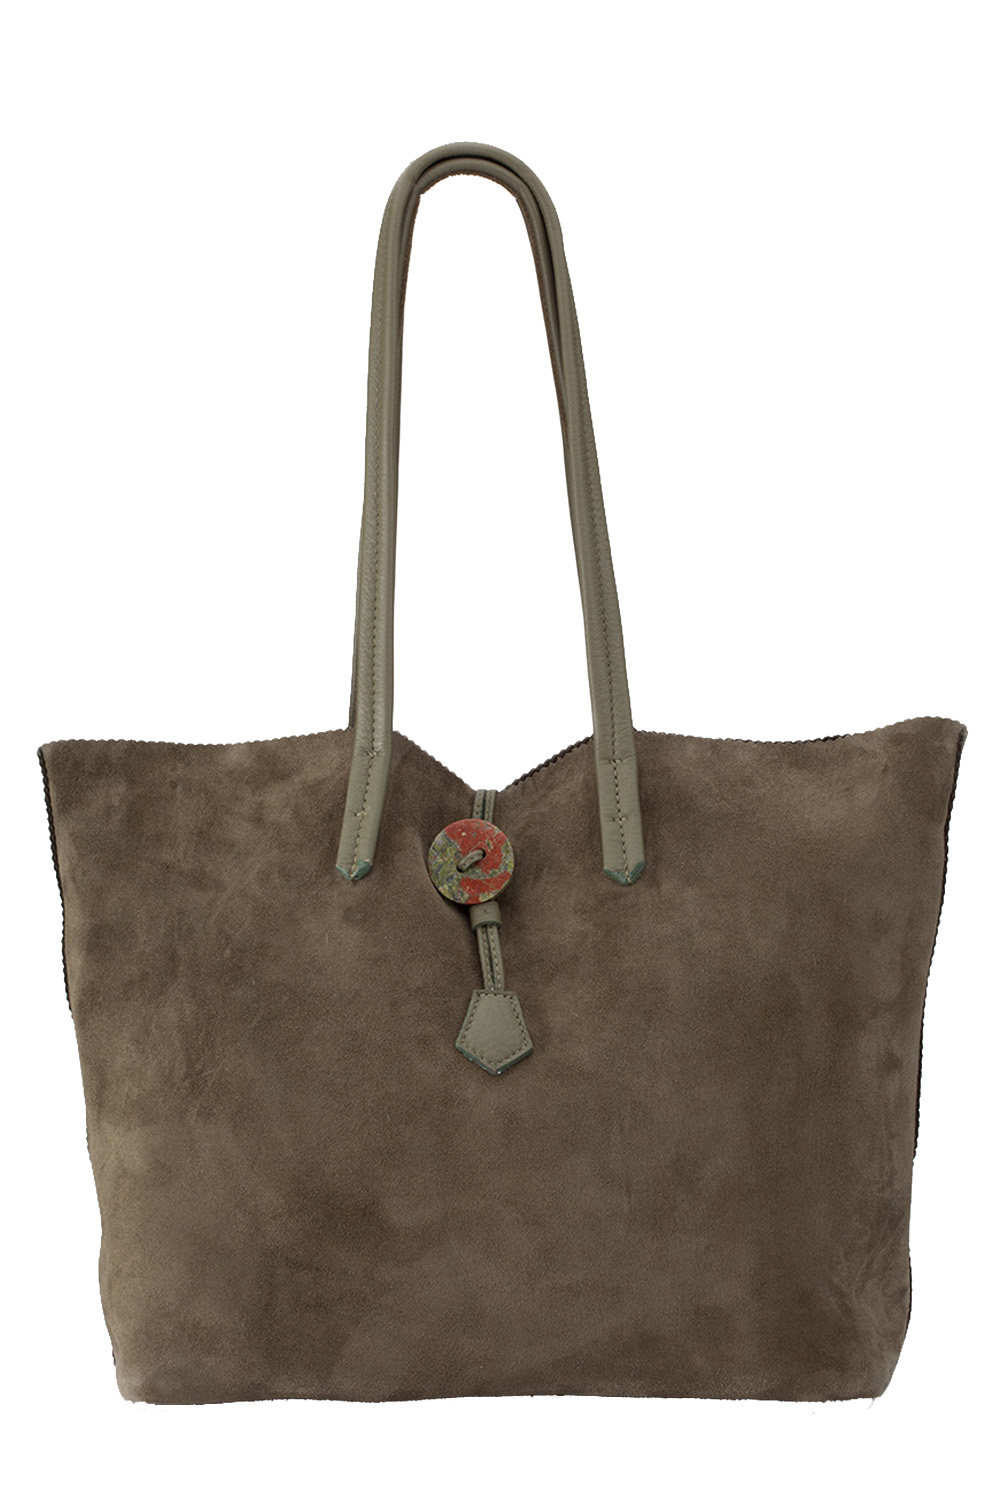 Bag, $470, by Deadly Ponies.